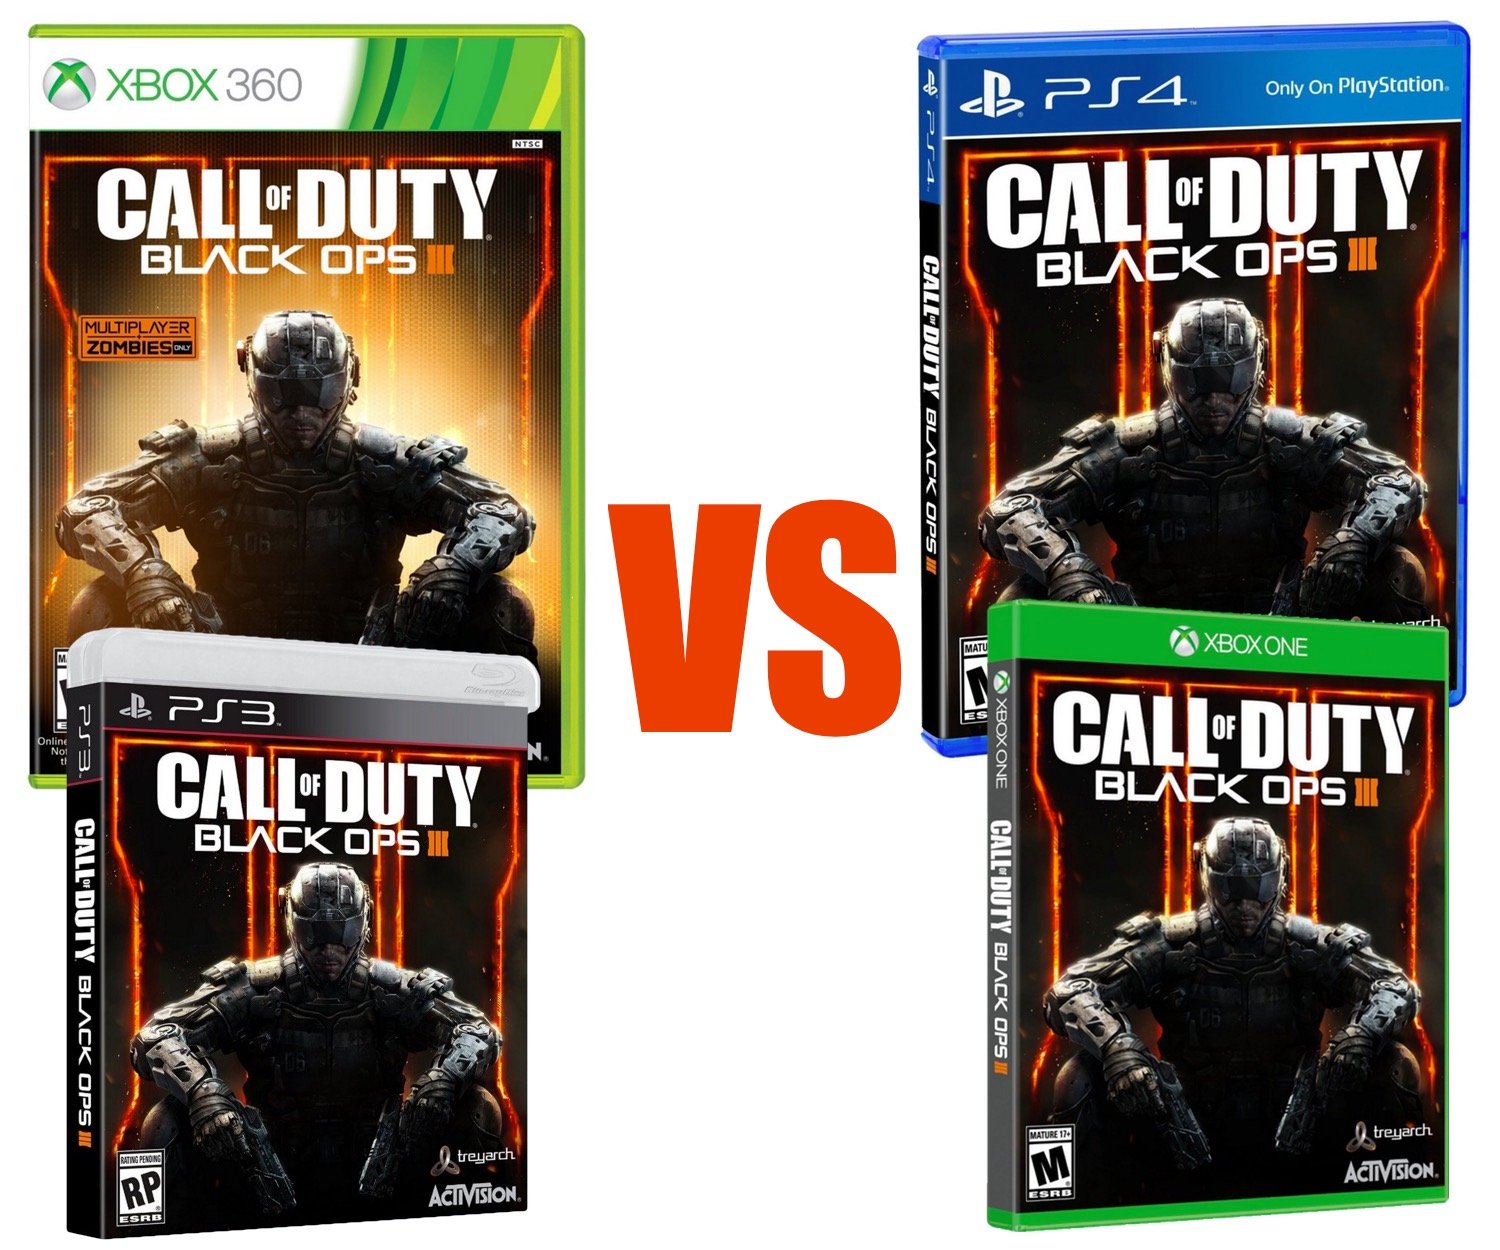 What you need to know about the PS3 & Xbox 360 Black Ops 3 game compared to the PS4, Xbox One and PC version.